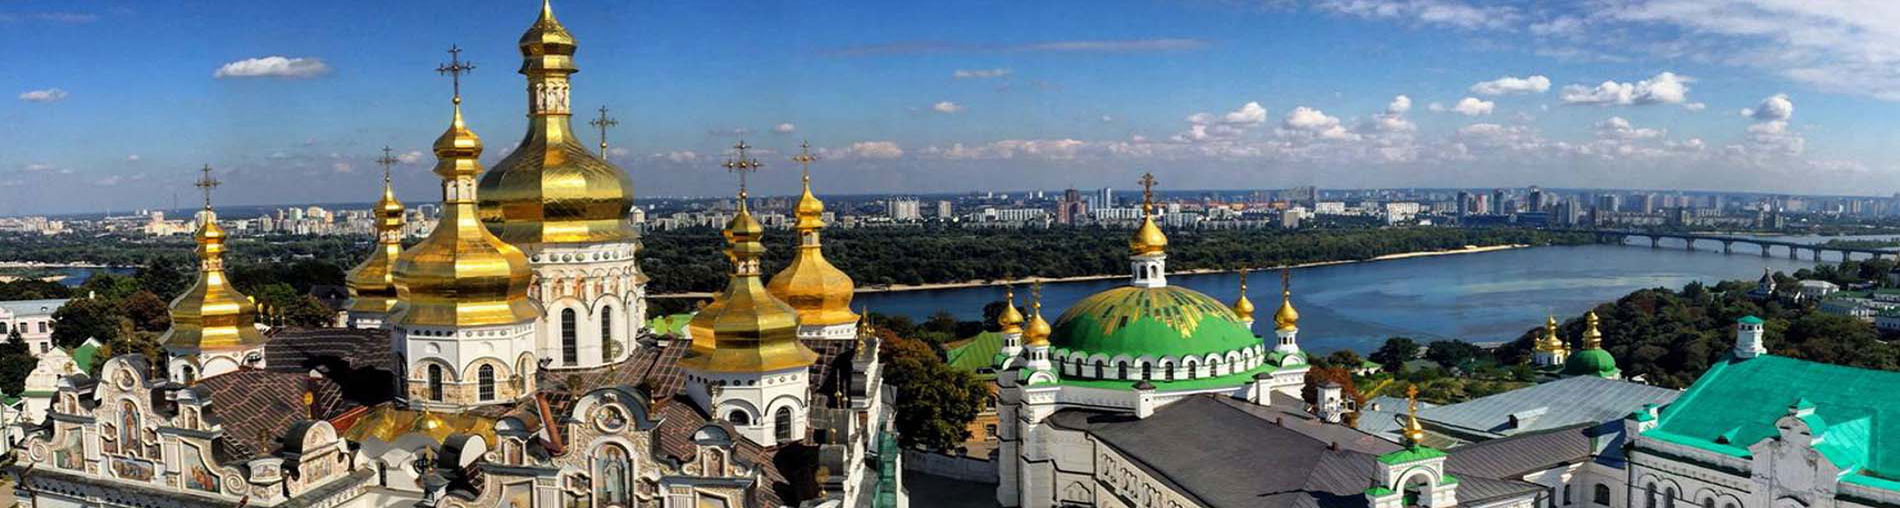 Kyiv, Ukraine Tour Package From India